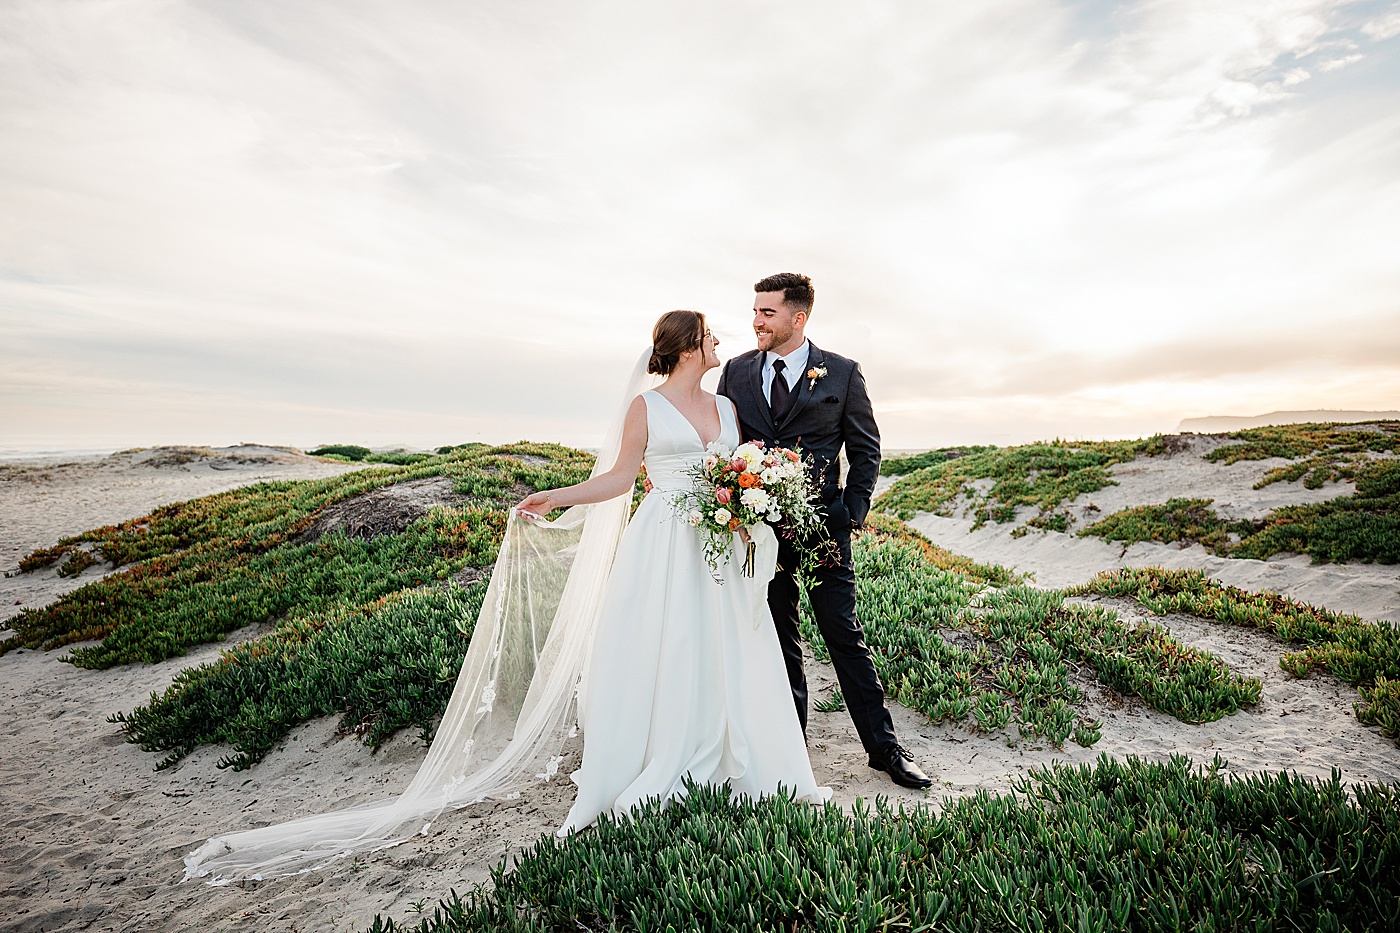 Coronado Beach elopement at sunset. A bride and groom at the sand dunes.